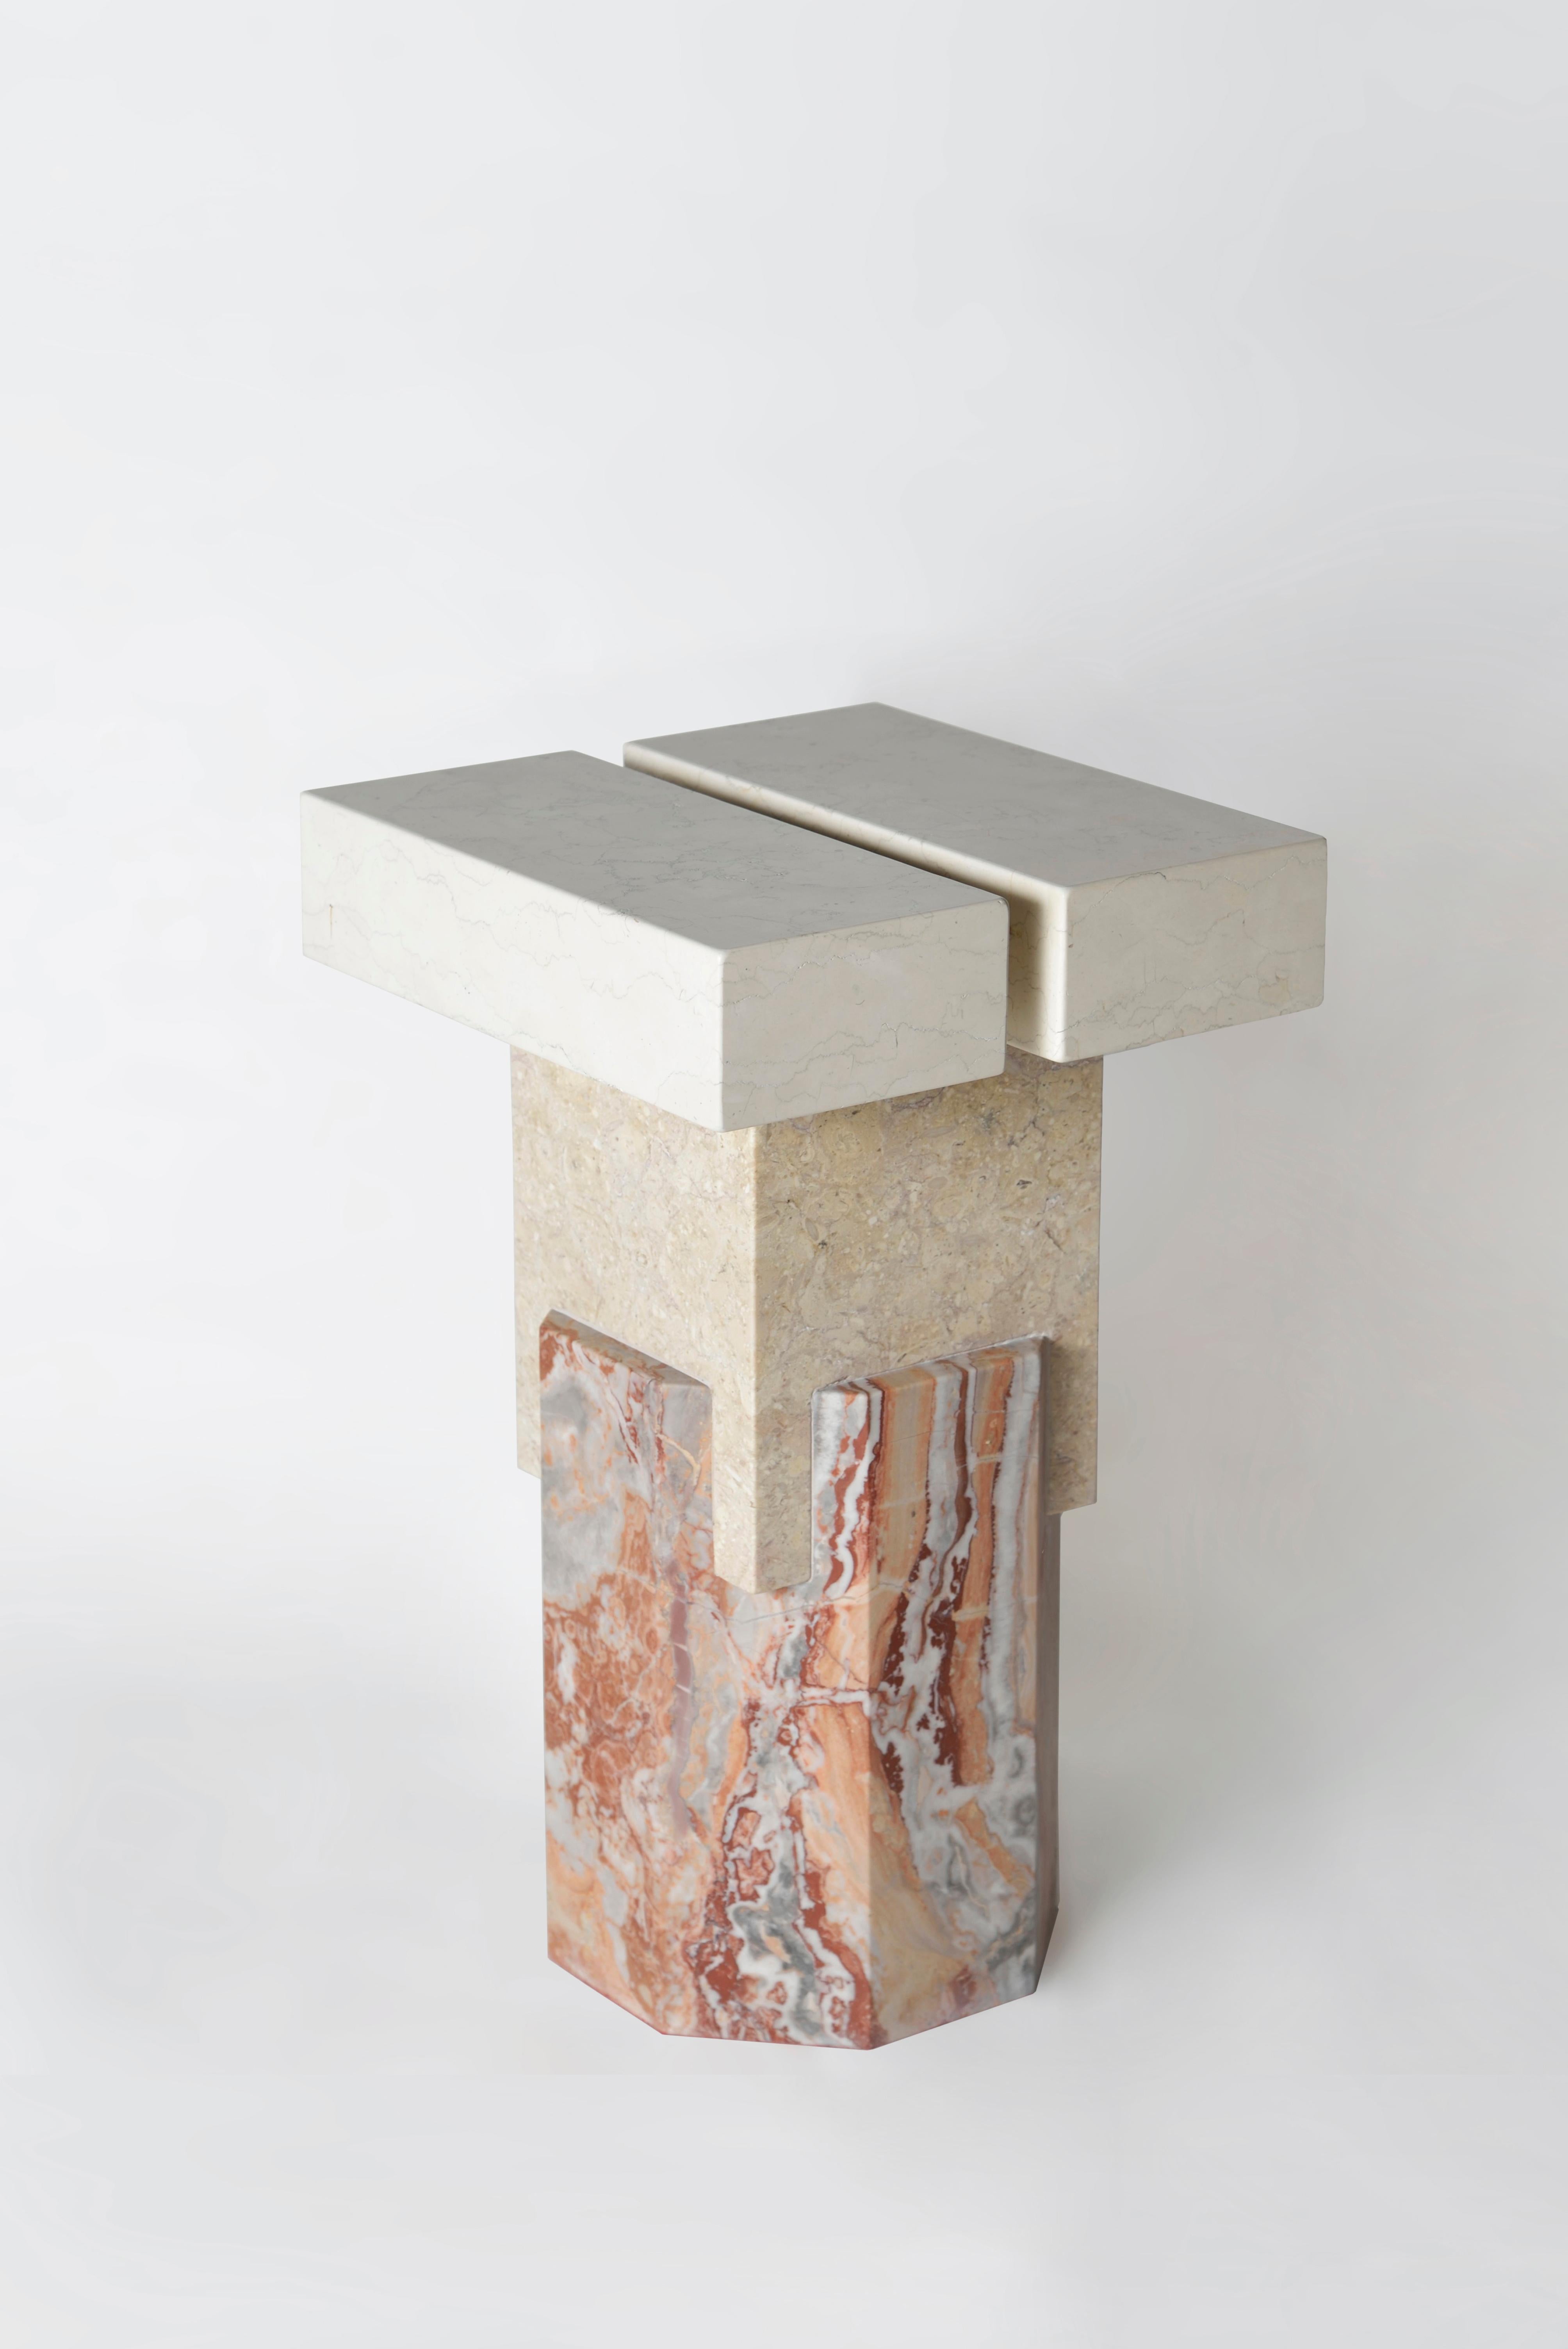 Marble Ionik stool by Oeuffice
Edition: 12 + 2AP
2014
Dimensions: 25 x 26 x 42 cm
Materials: Arabescato Robico marble, Chiampo stone, Biancone marble

Kapital is a series of limited edition tables and stools based on essential forms,